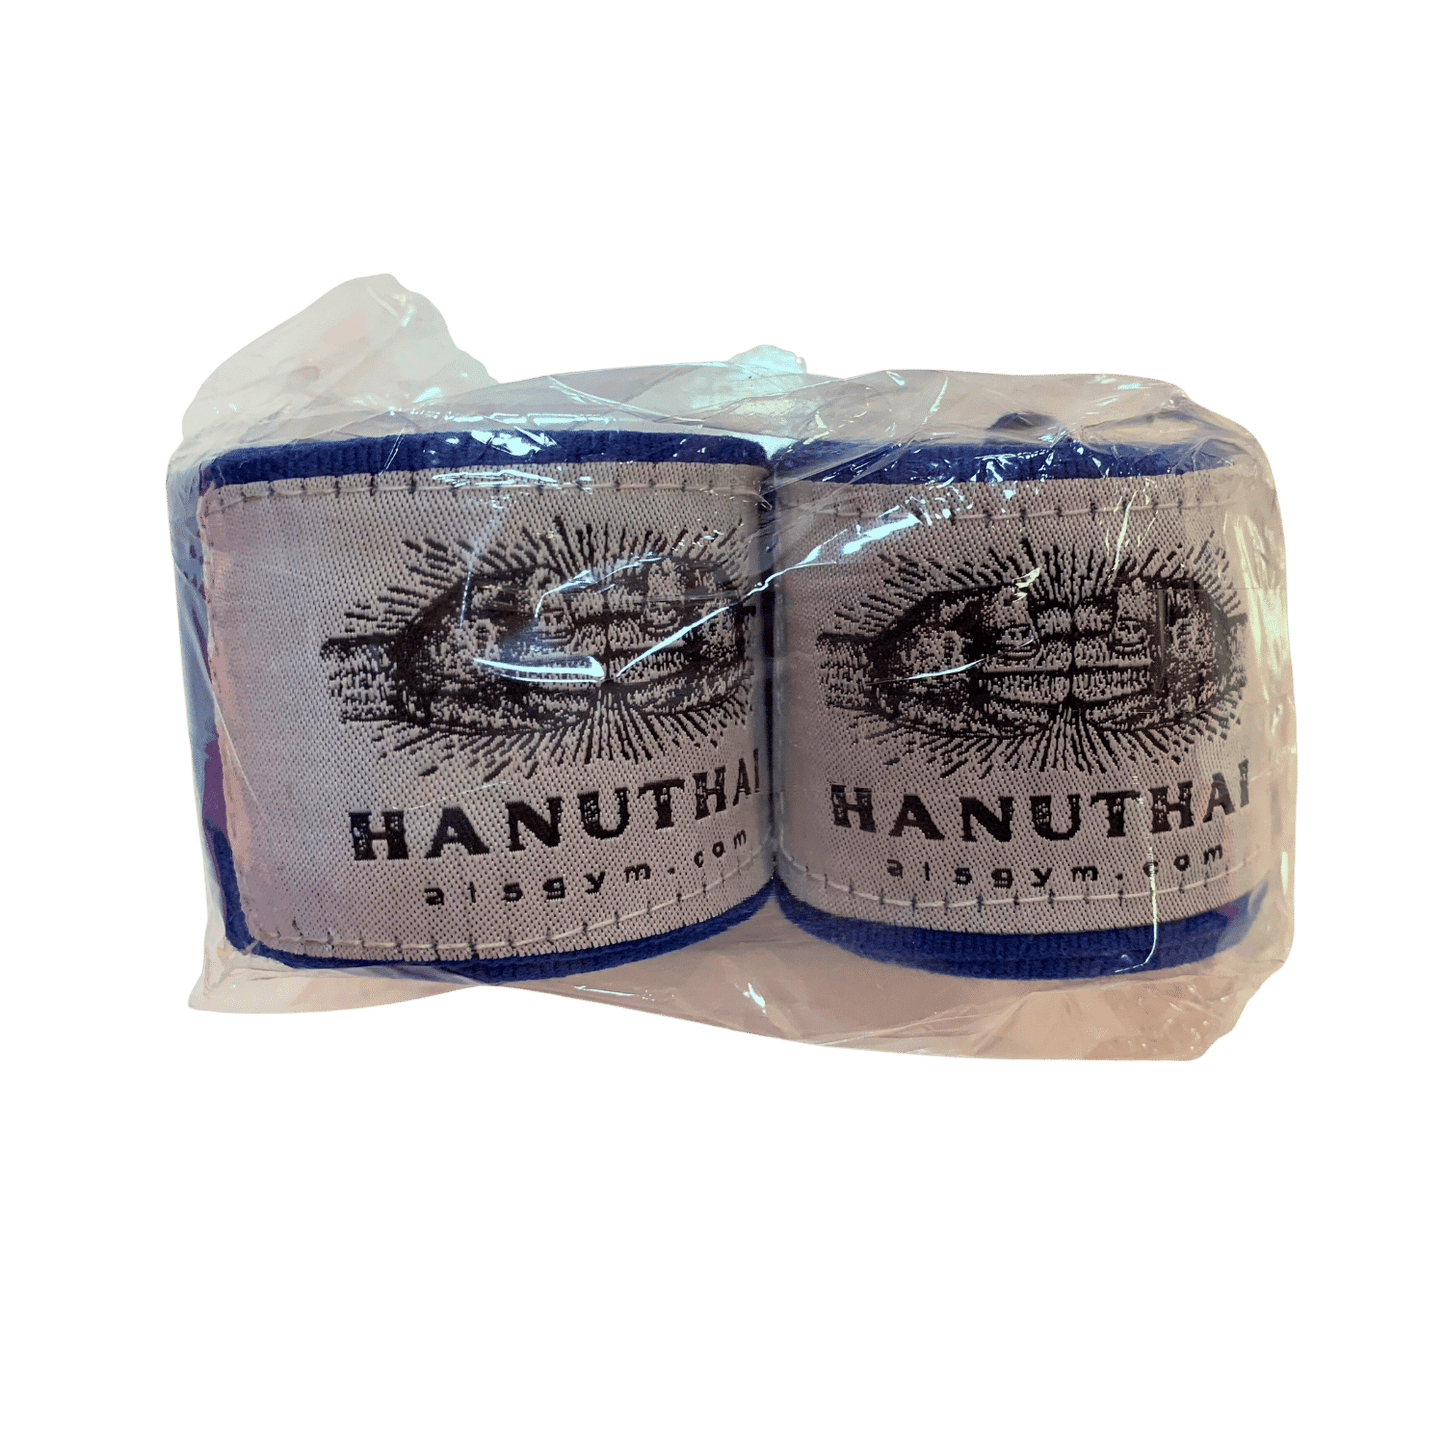 Two packages of Hanuthai Muay Thai Hand Wraps - Blue with velcro closure on a white background.